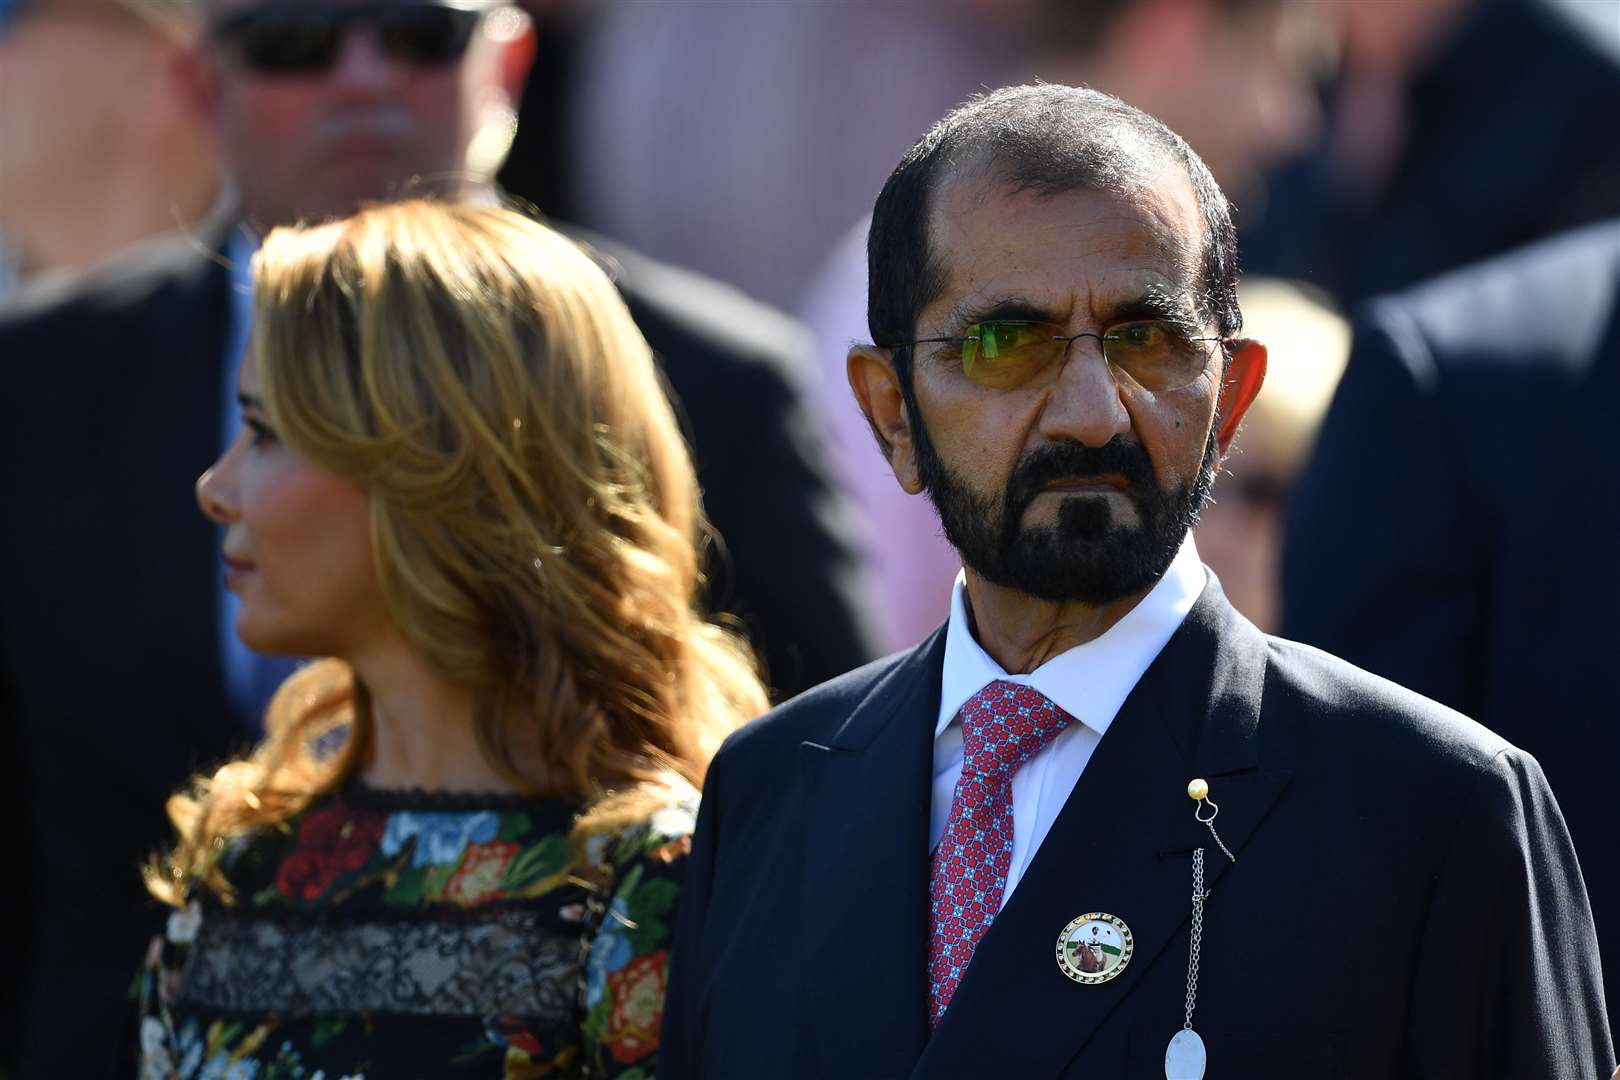 Sheikh Mohammed is heavily involved in horse racing, the court has previously heard (Joe Giddens/PA)